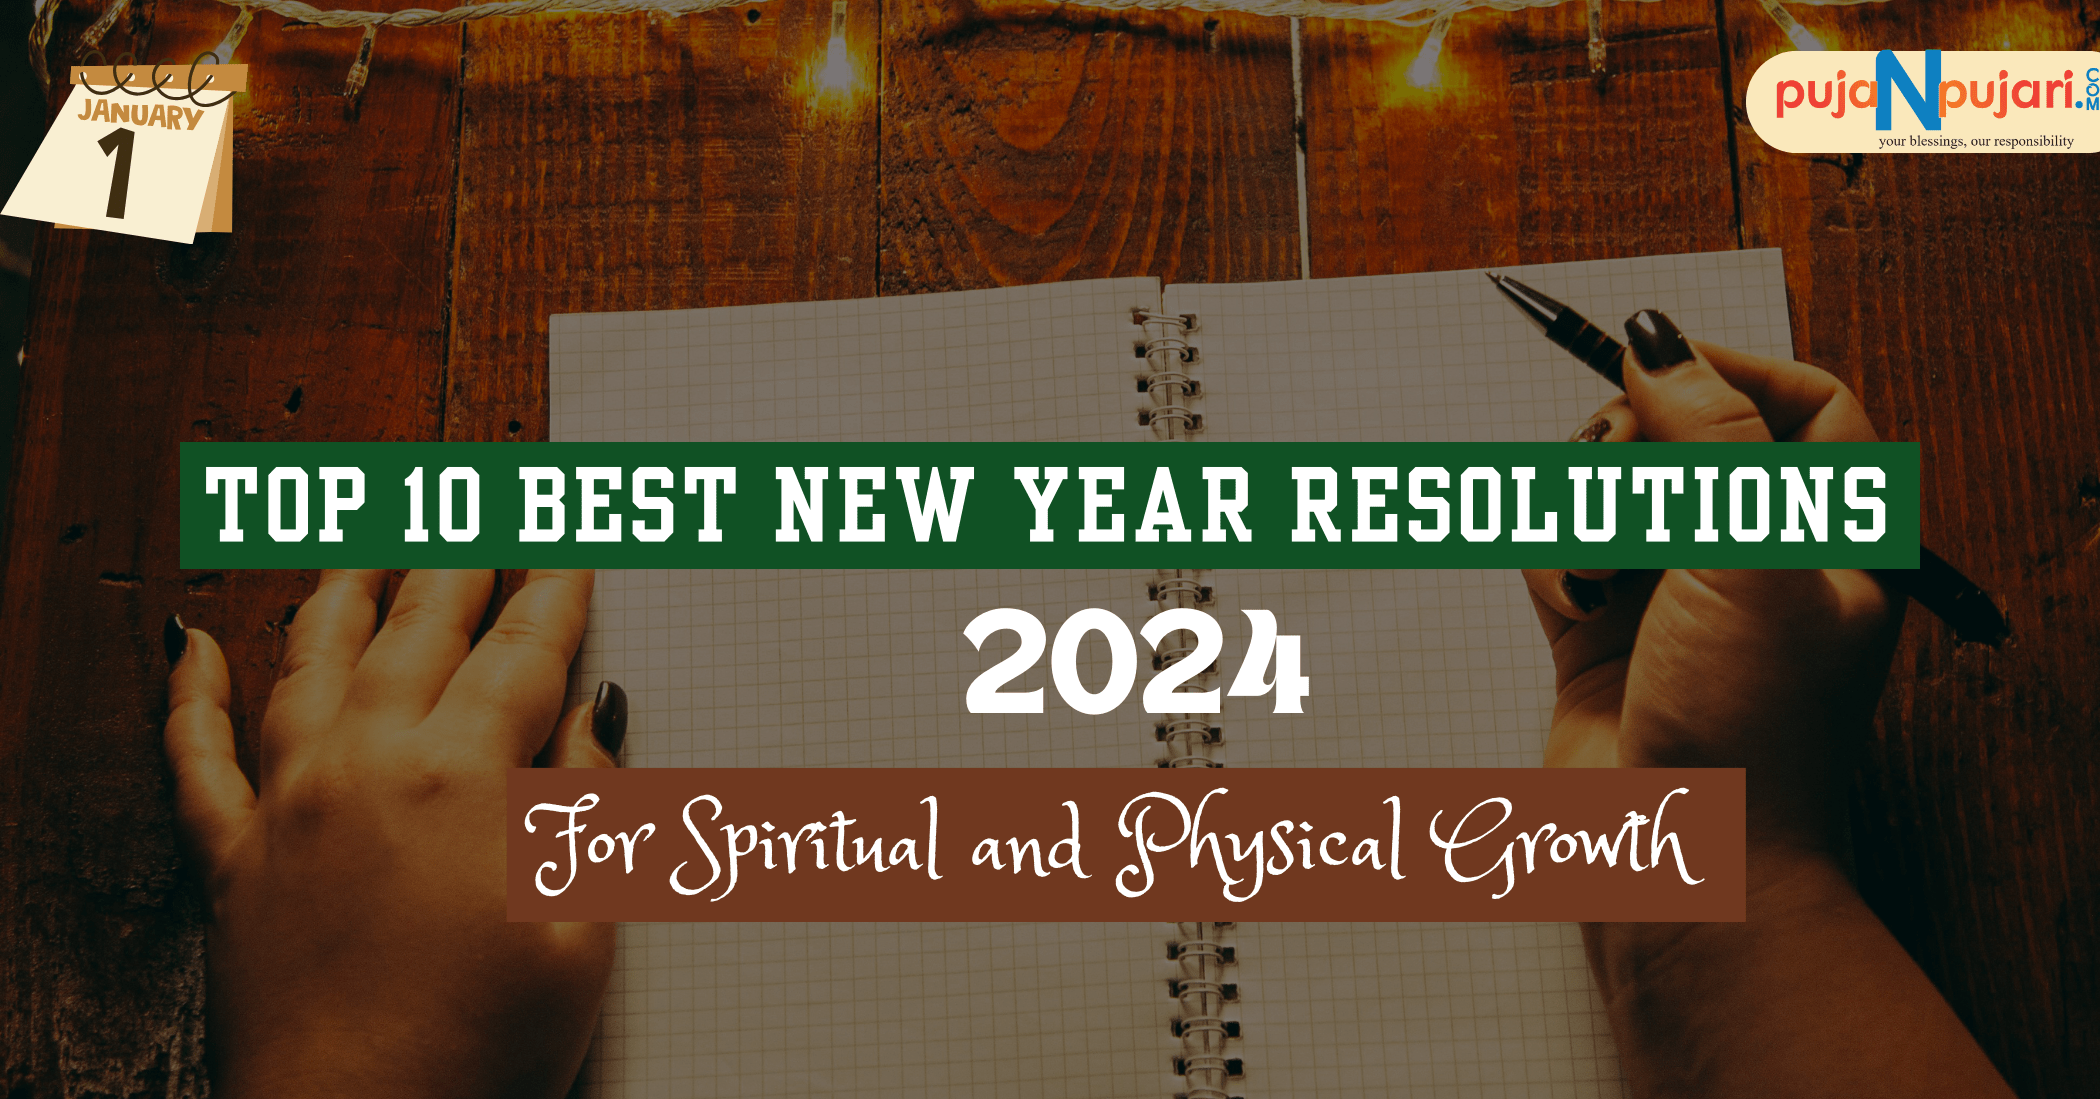 Top 10 Best New Year Resolutions 2024: For Spiritual and Physical Growth